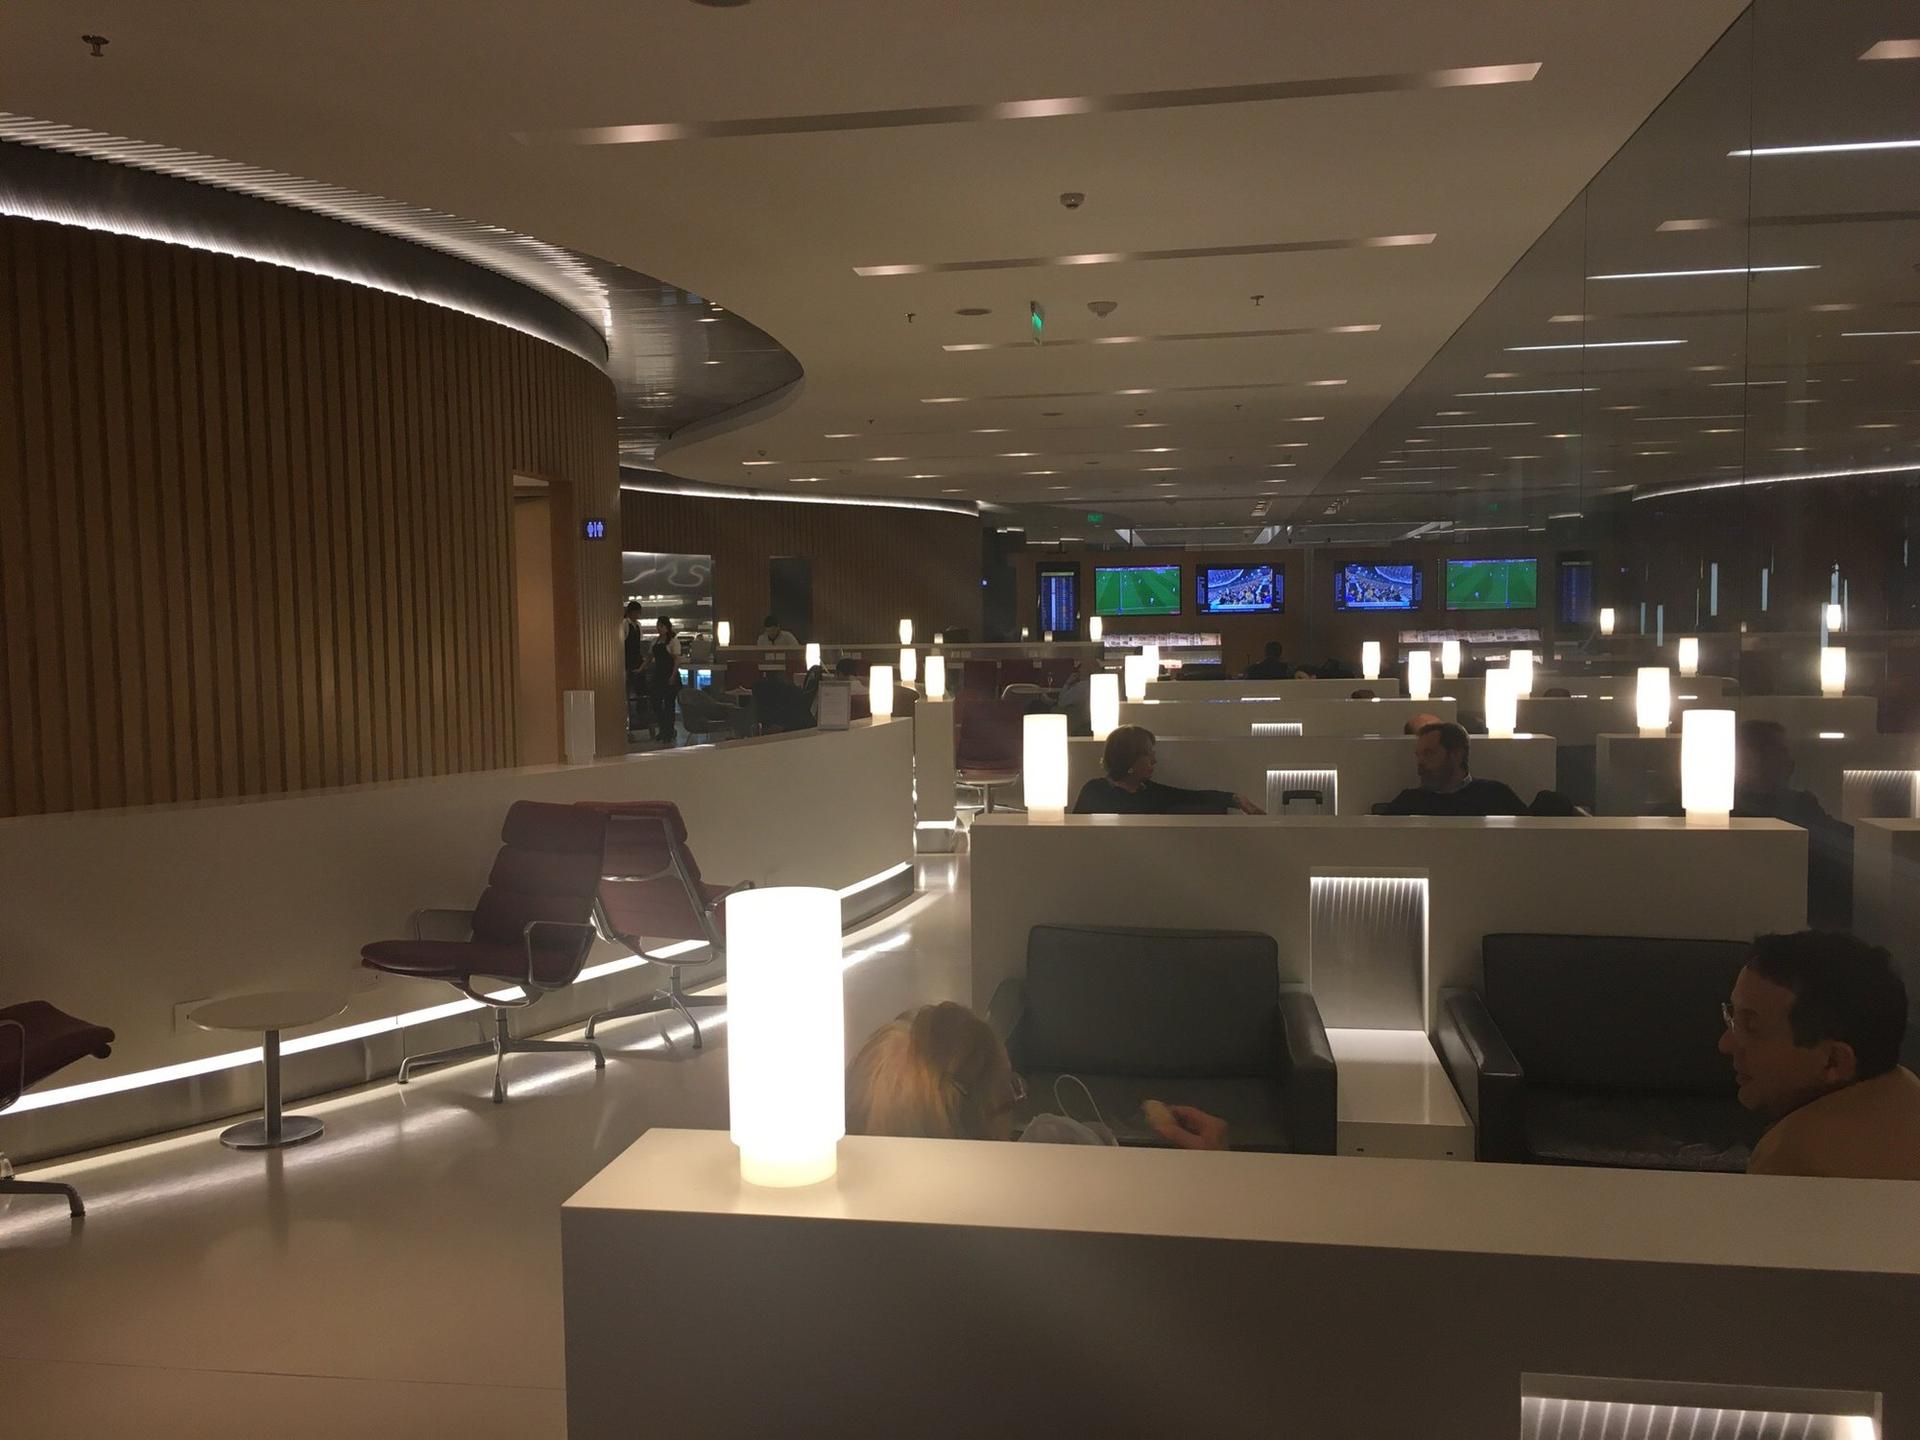 American Airlines Admirals Club & Iberia VIP Lounge image 6 of 18